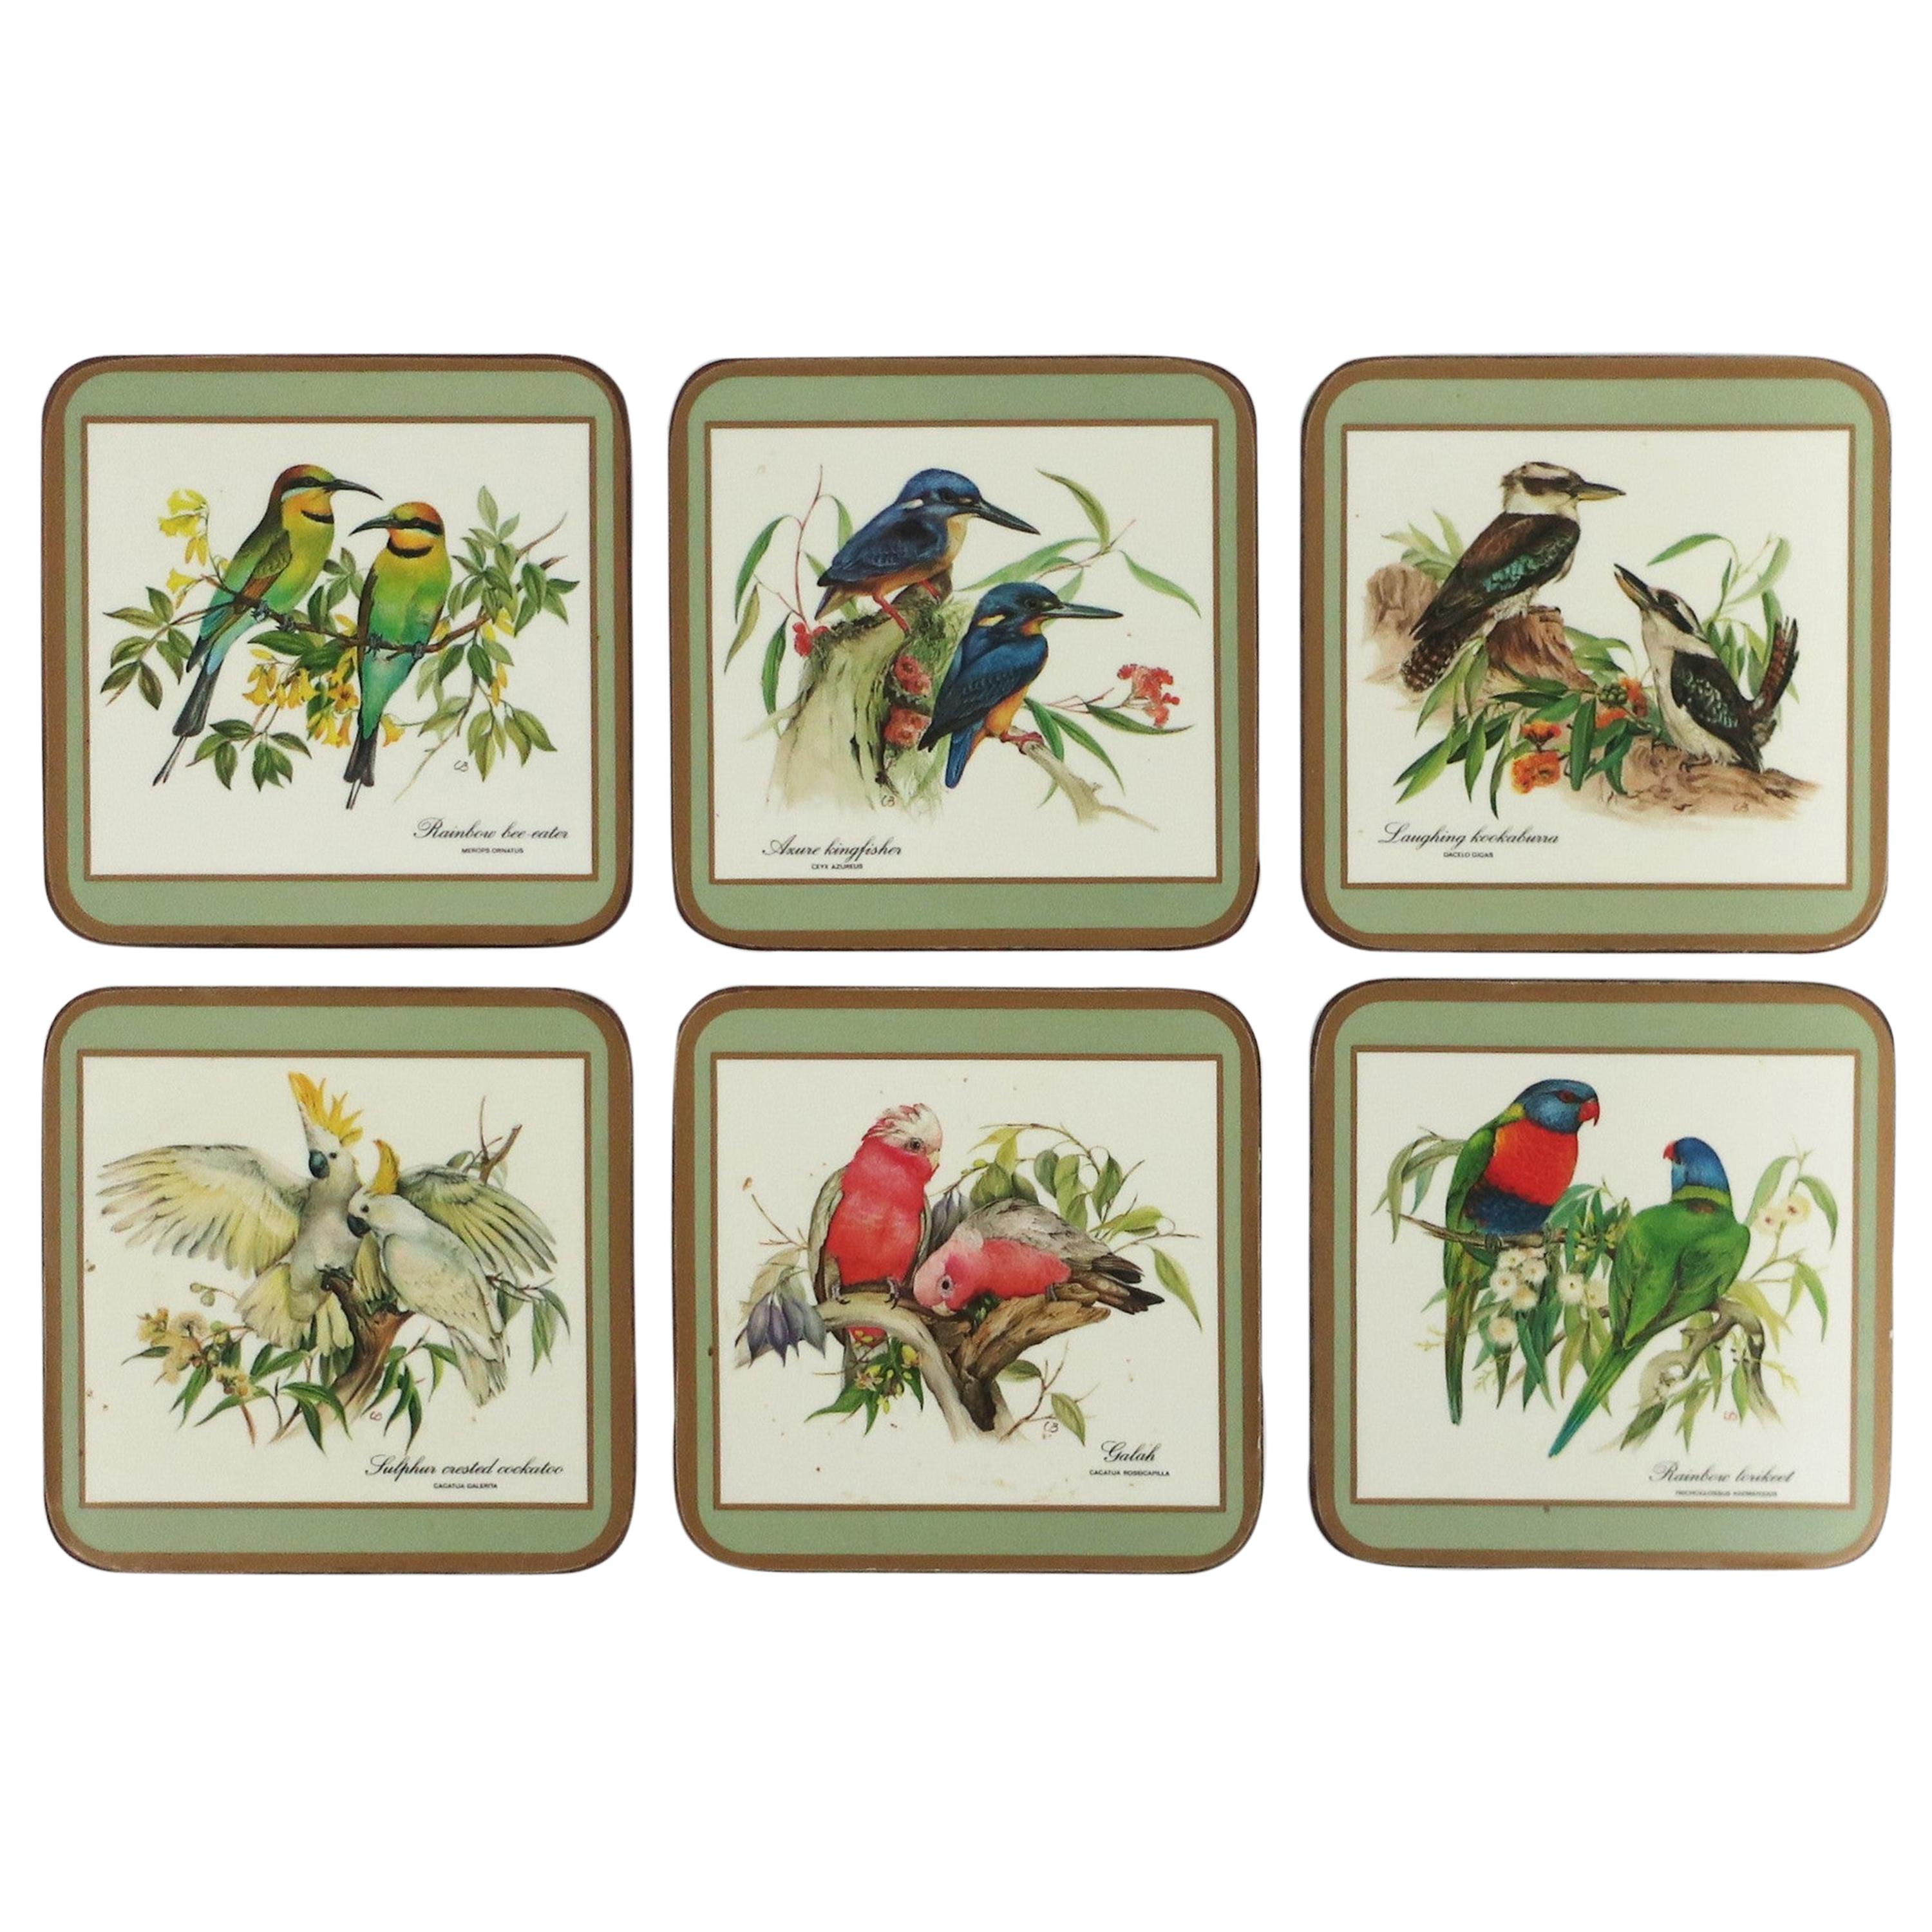 English Cocktail Drink Coasters with Bird Designs, Set of 6